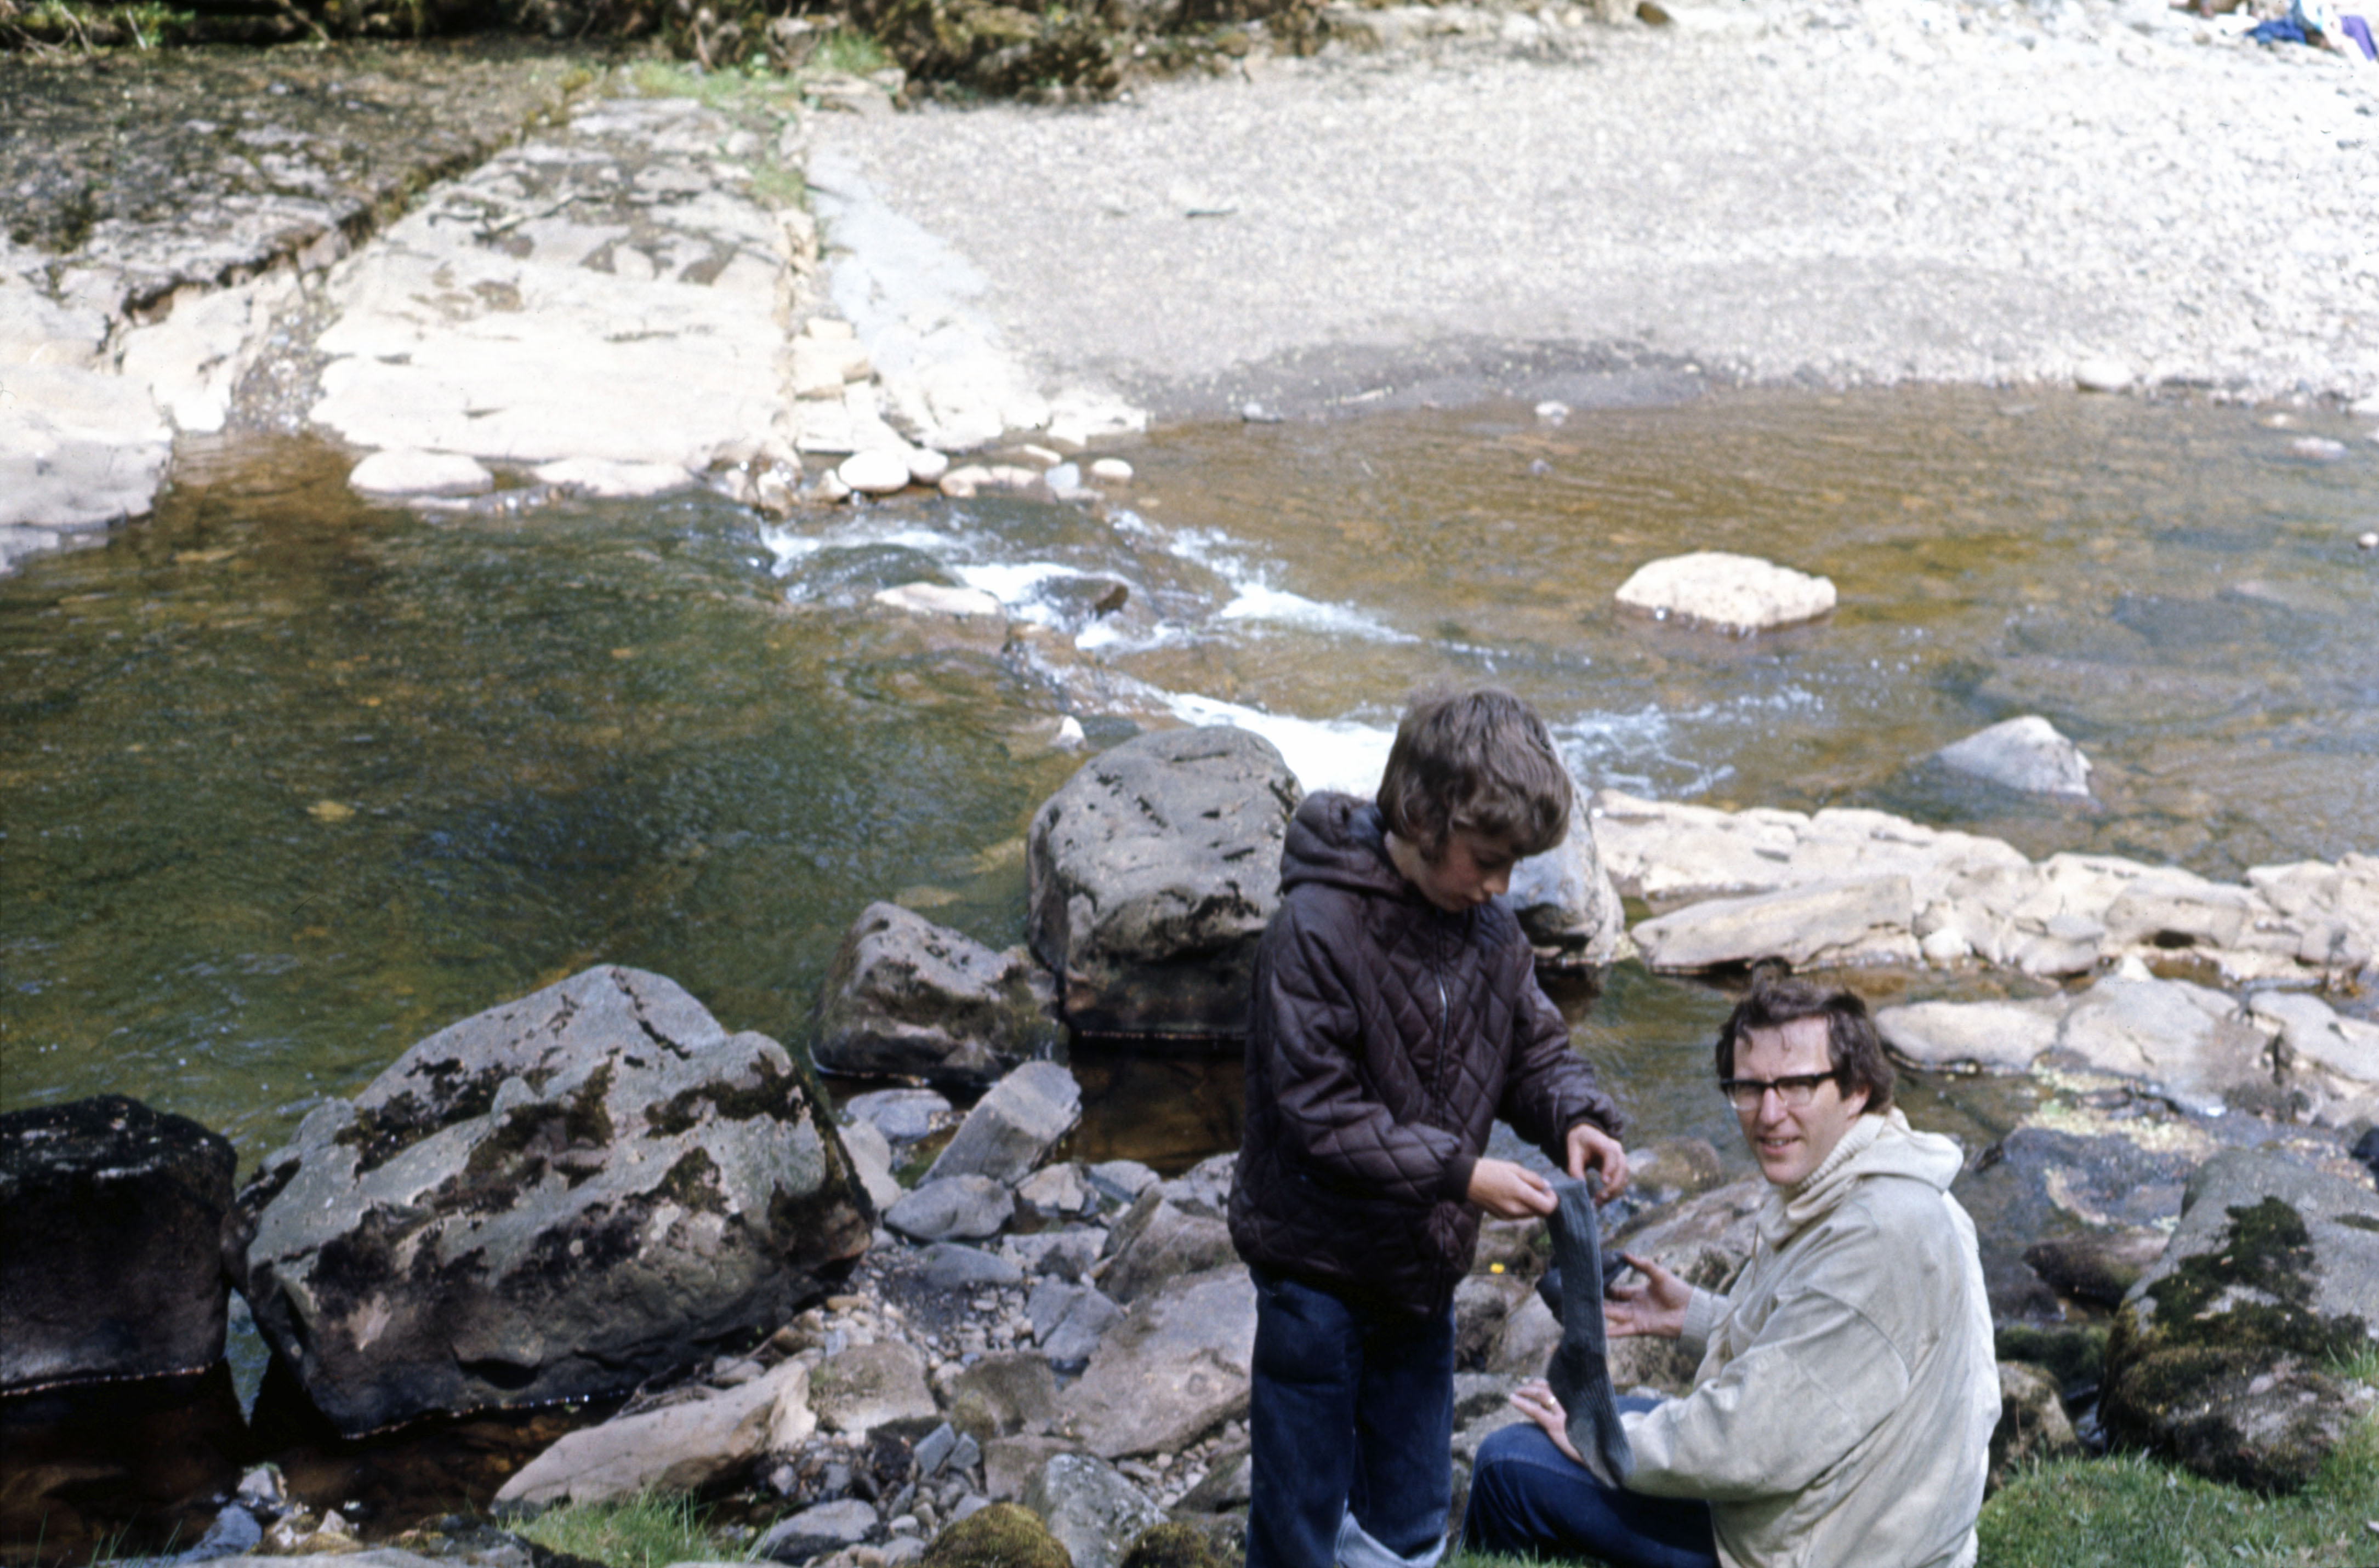 7404120 28 May 1974 - Jon got his feet wet while crossing the river over the stepping stones.